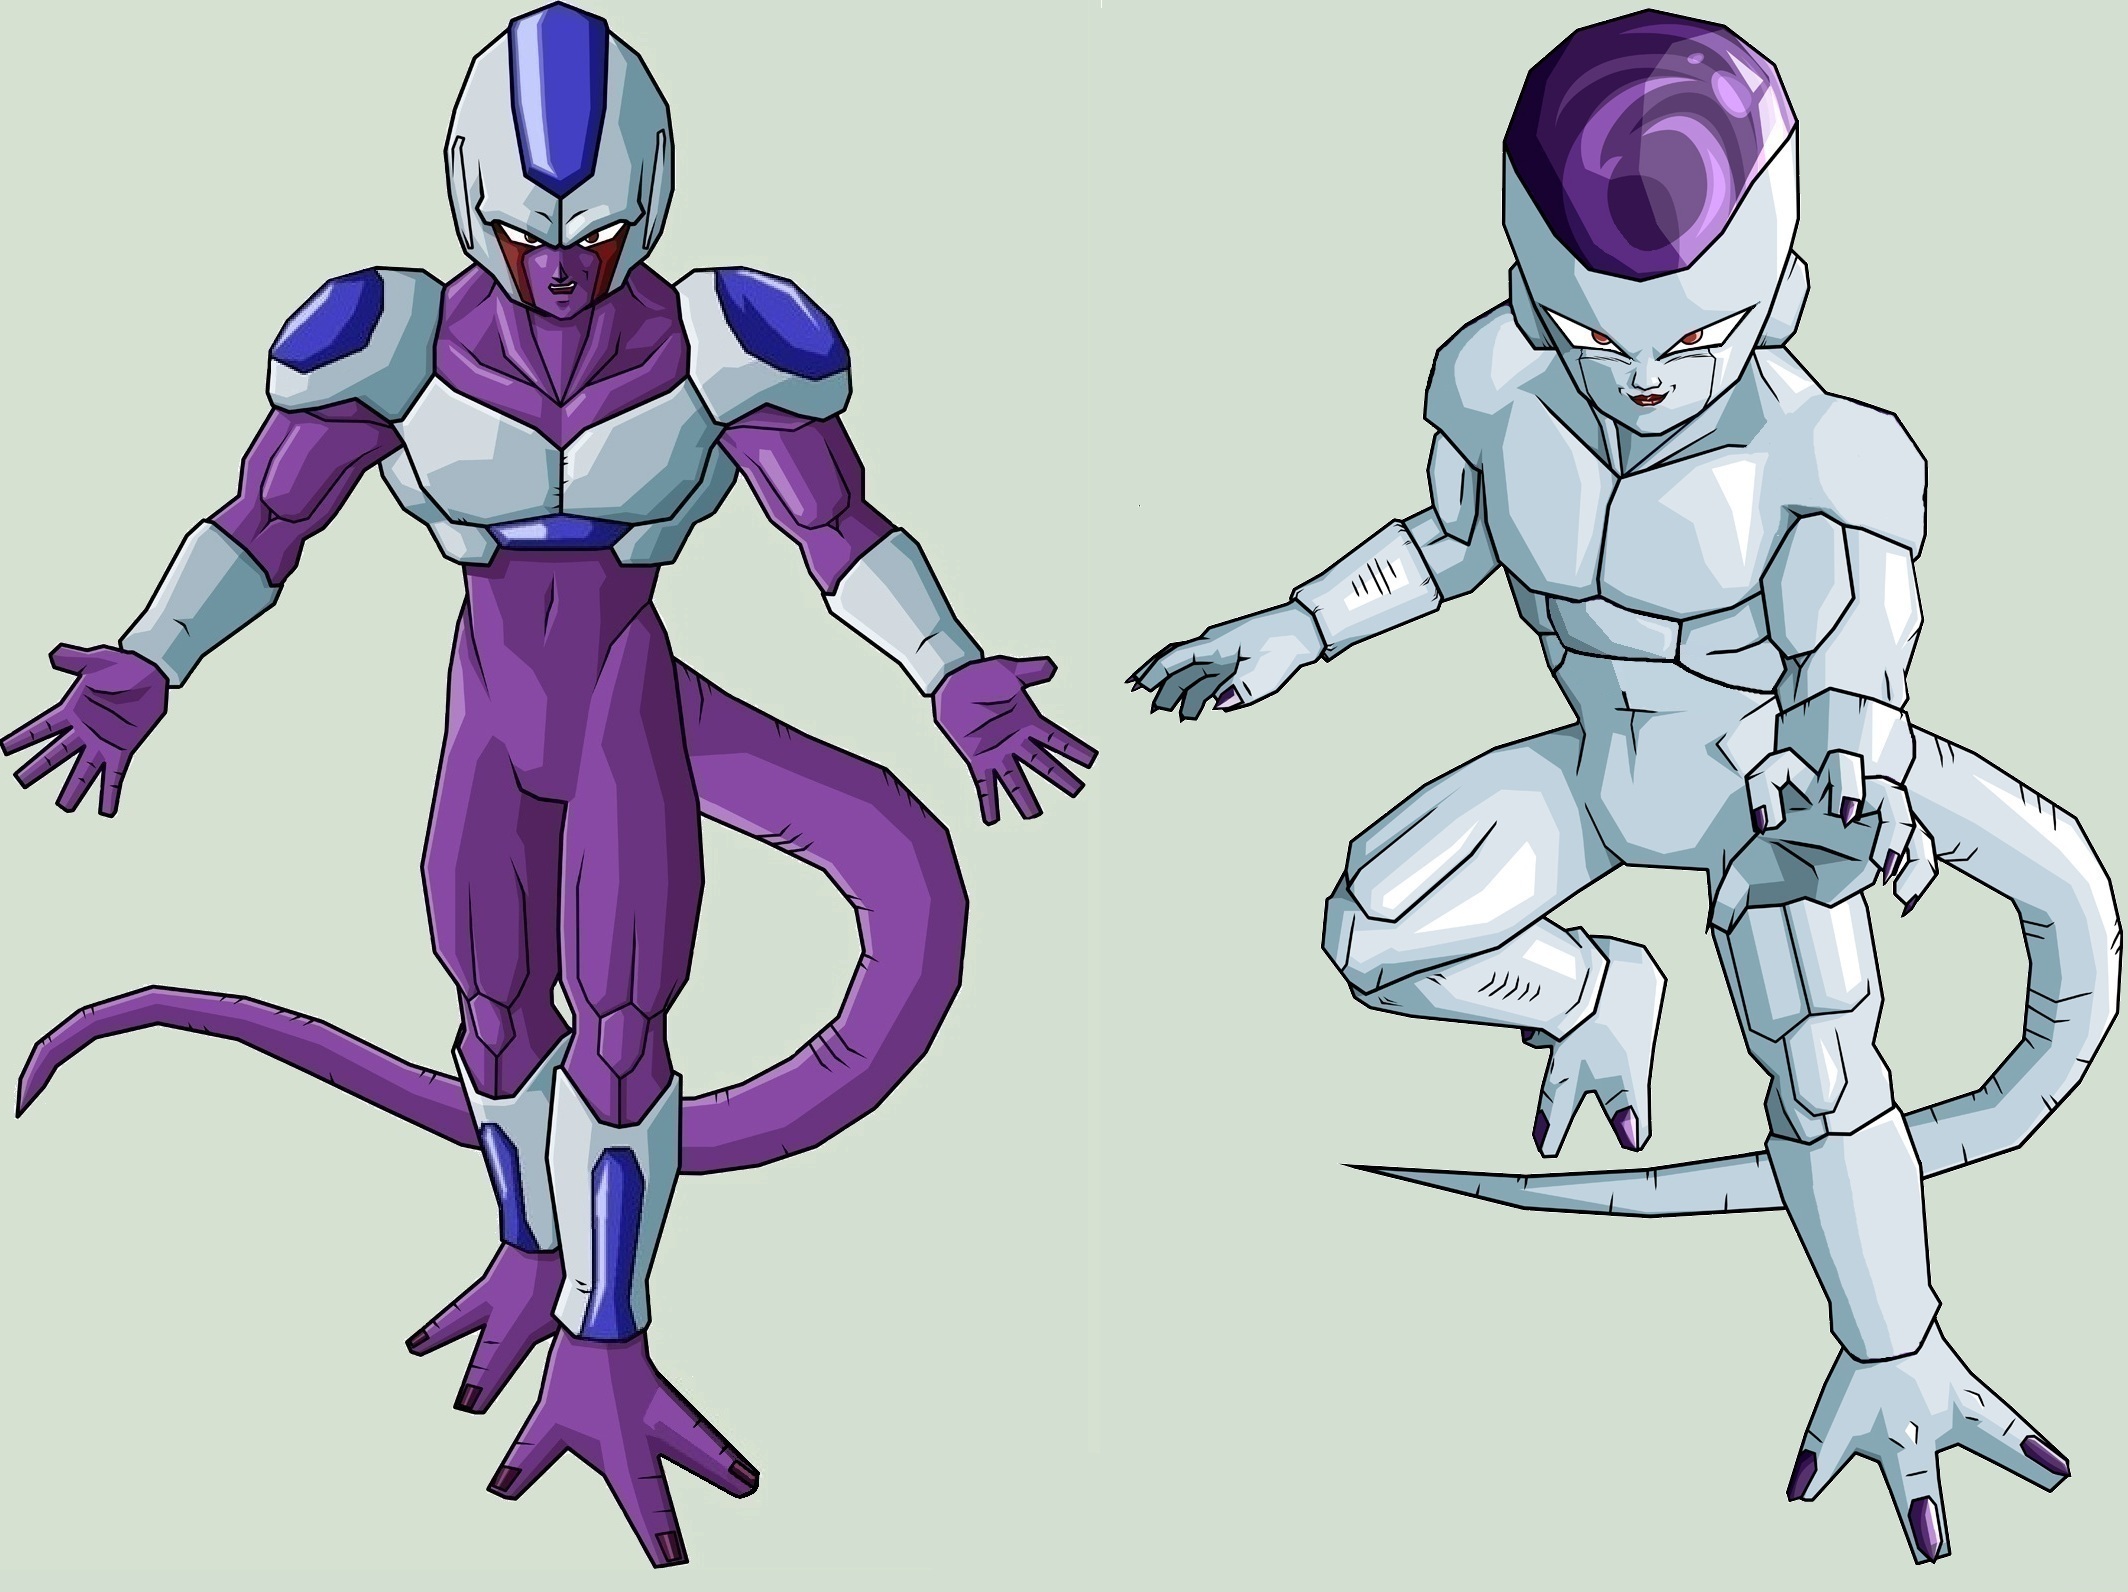 The frieza force (フ リ-ザ 軍 ぐ ん, furīza gun), also referred to as the galacti...